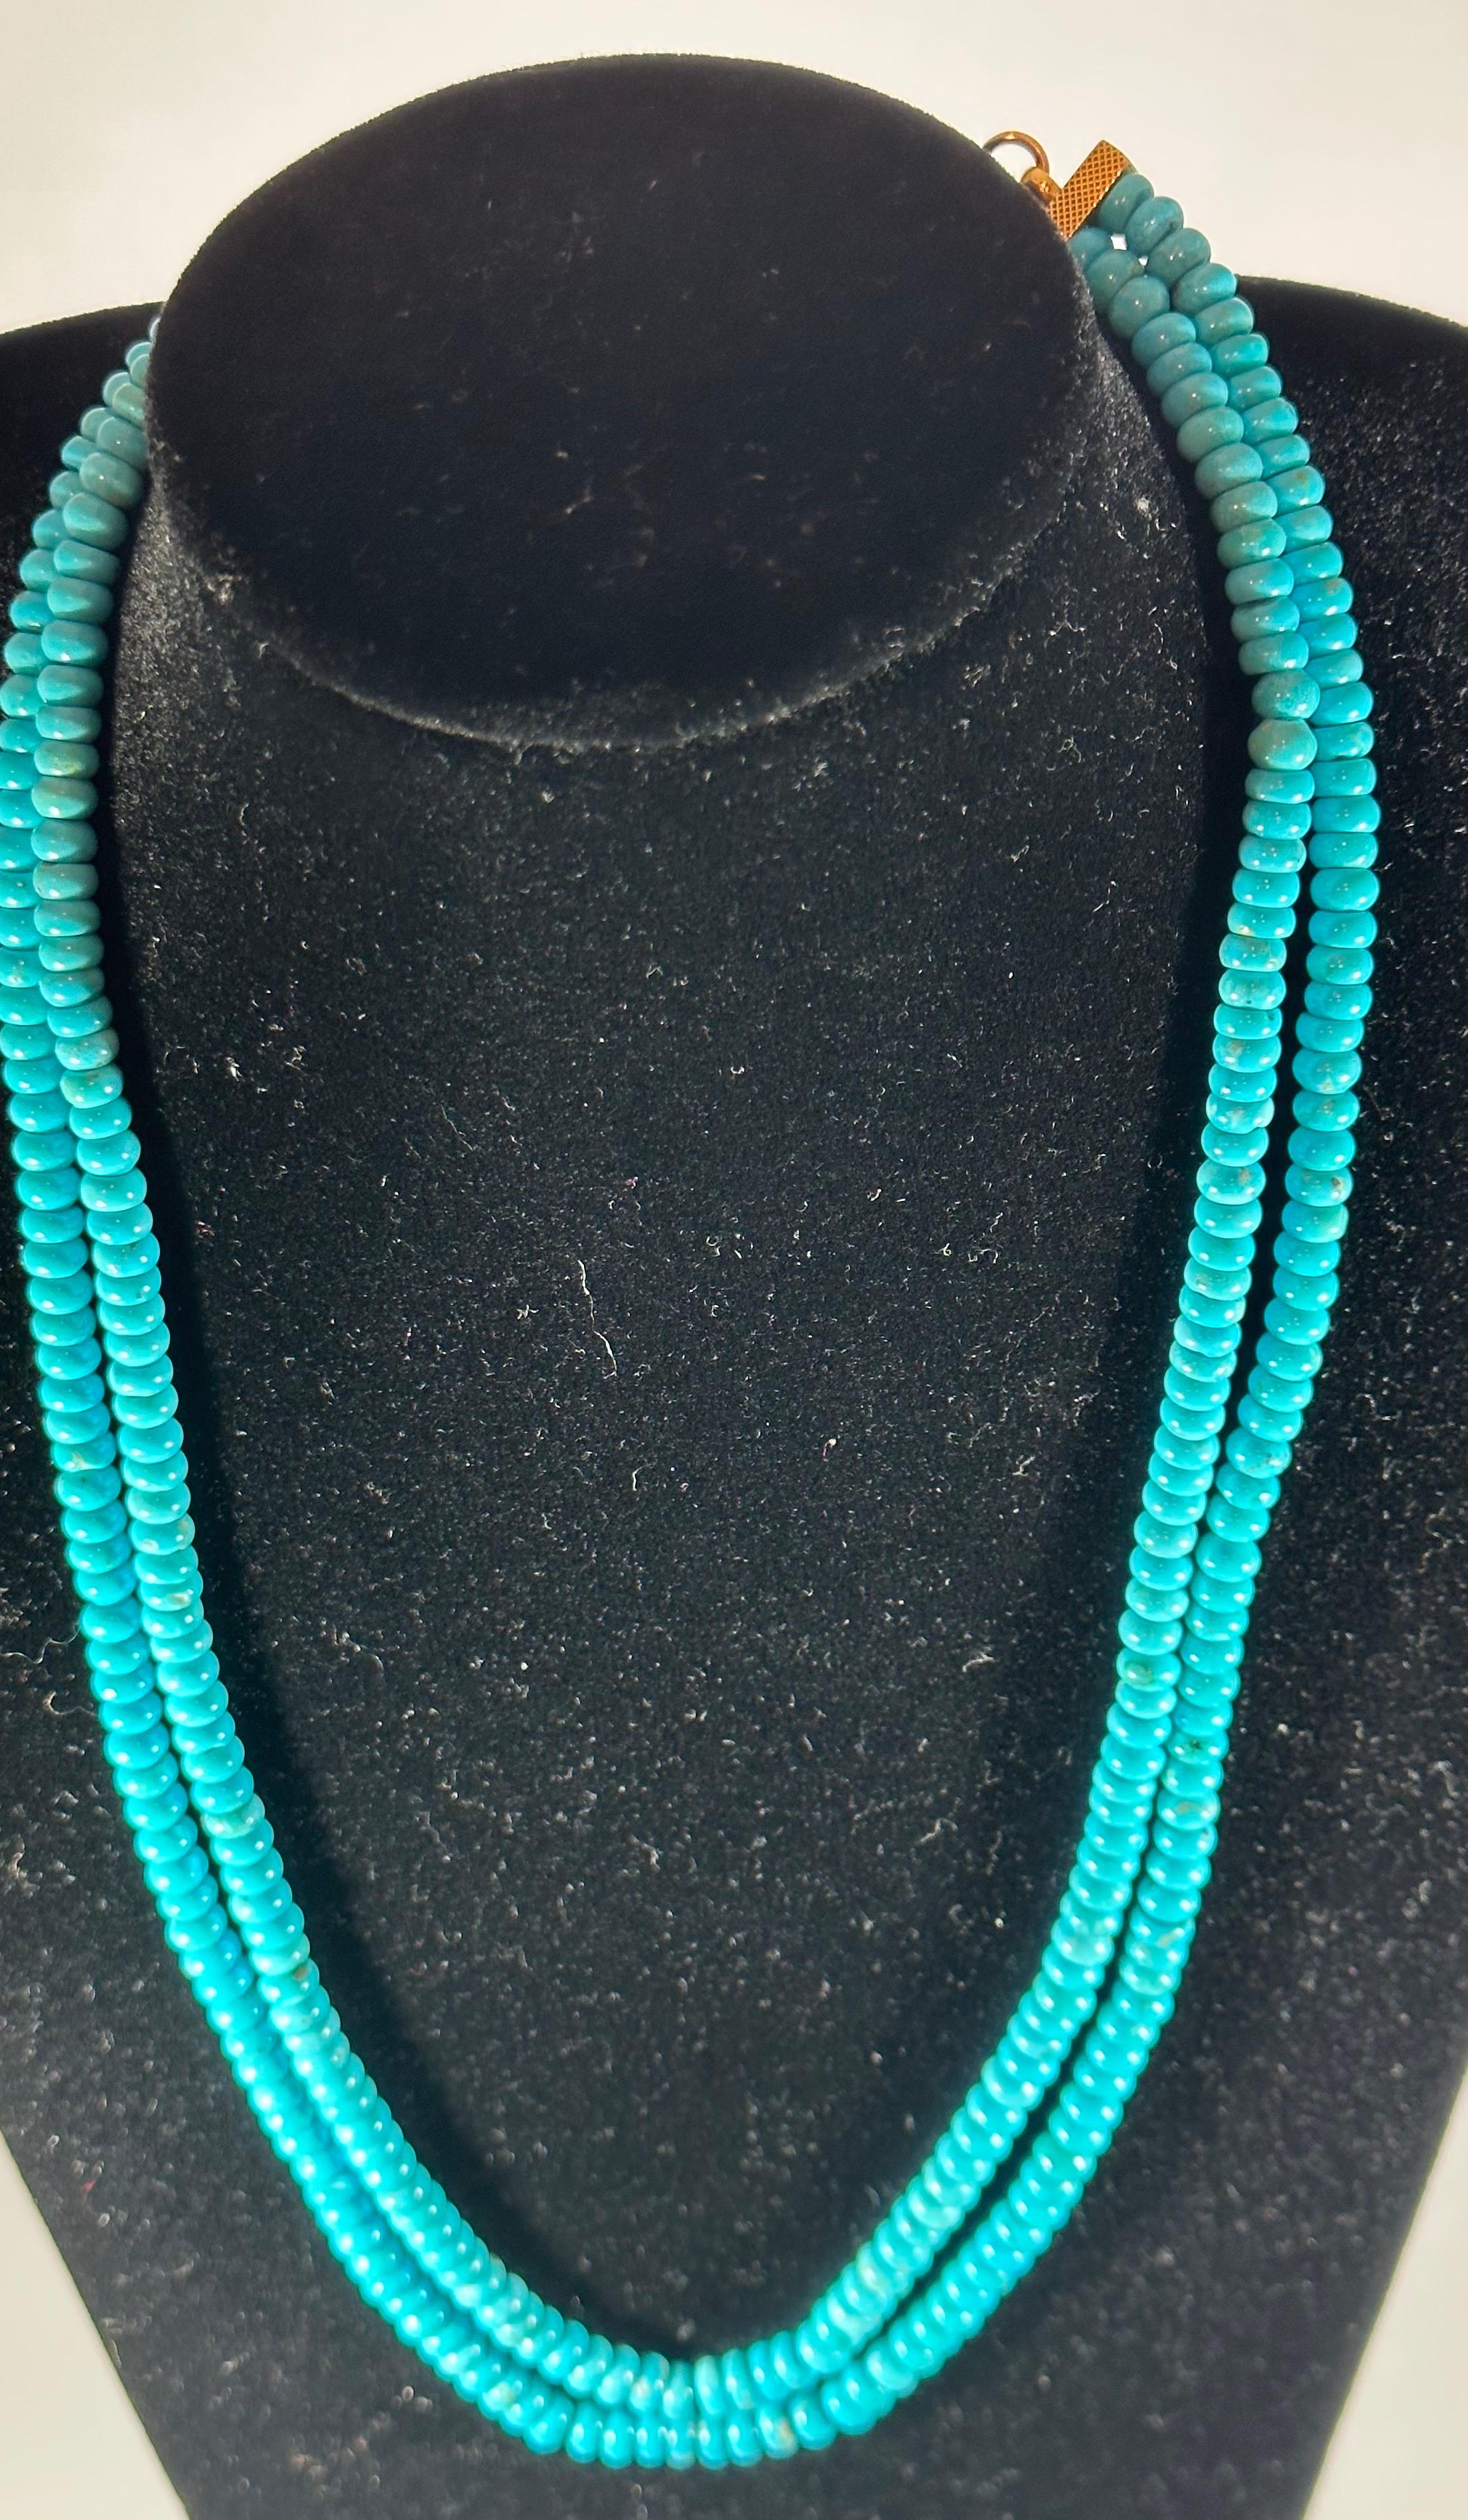 215 Carat Natural Sleeping Beauty Turquoise Necklace, Two Strand 14 Karat Gold For Sale 7